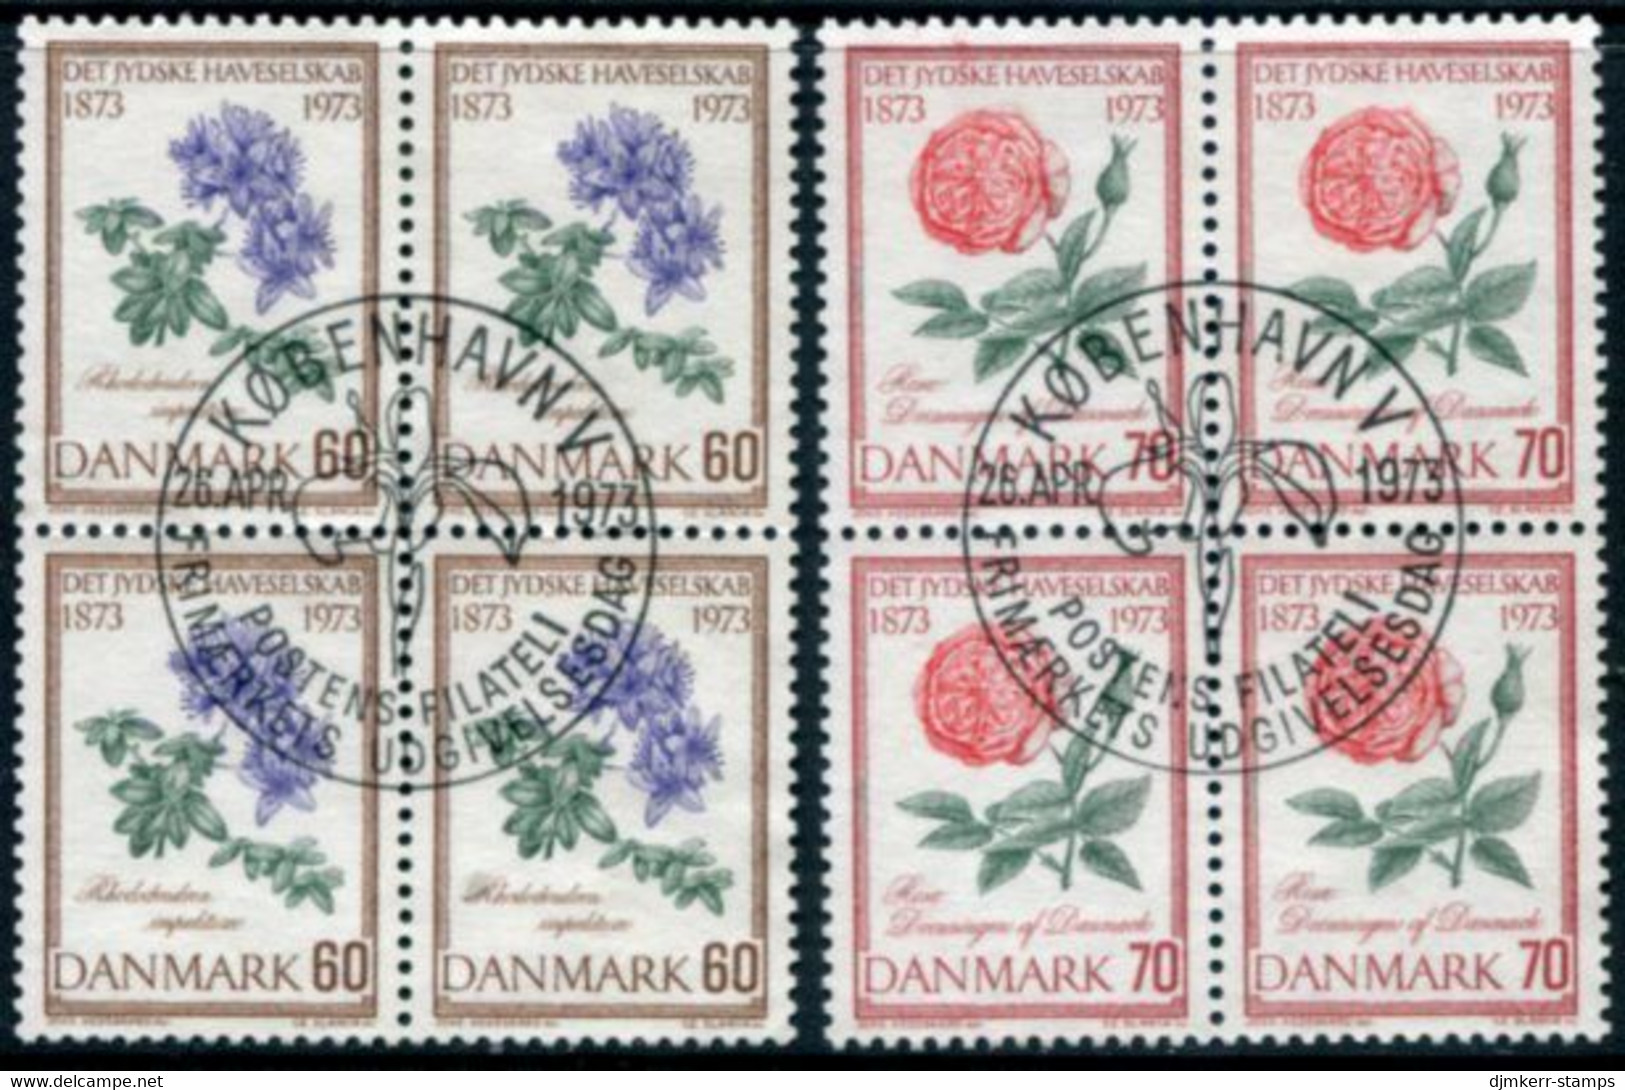 DENMARK 1973 Jutland Horticultural Society. Blocks Of 4 Used   Michel 543-44 - Used Stamps